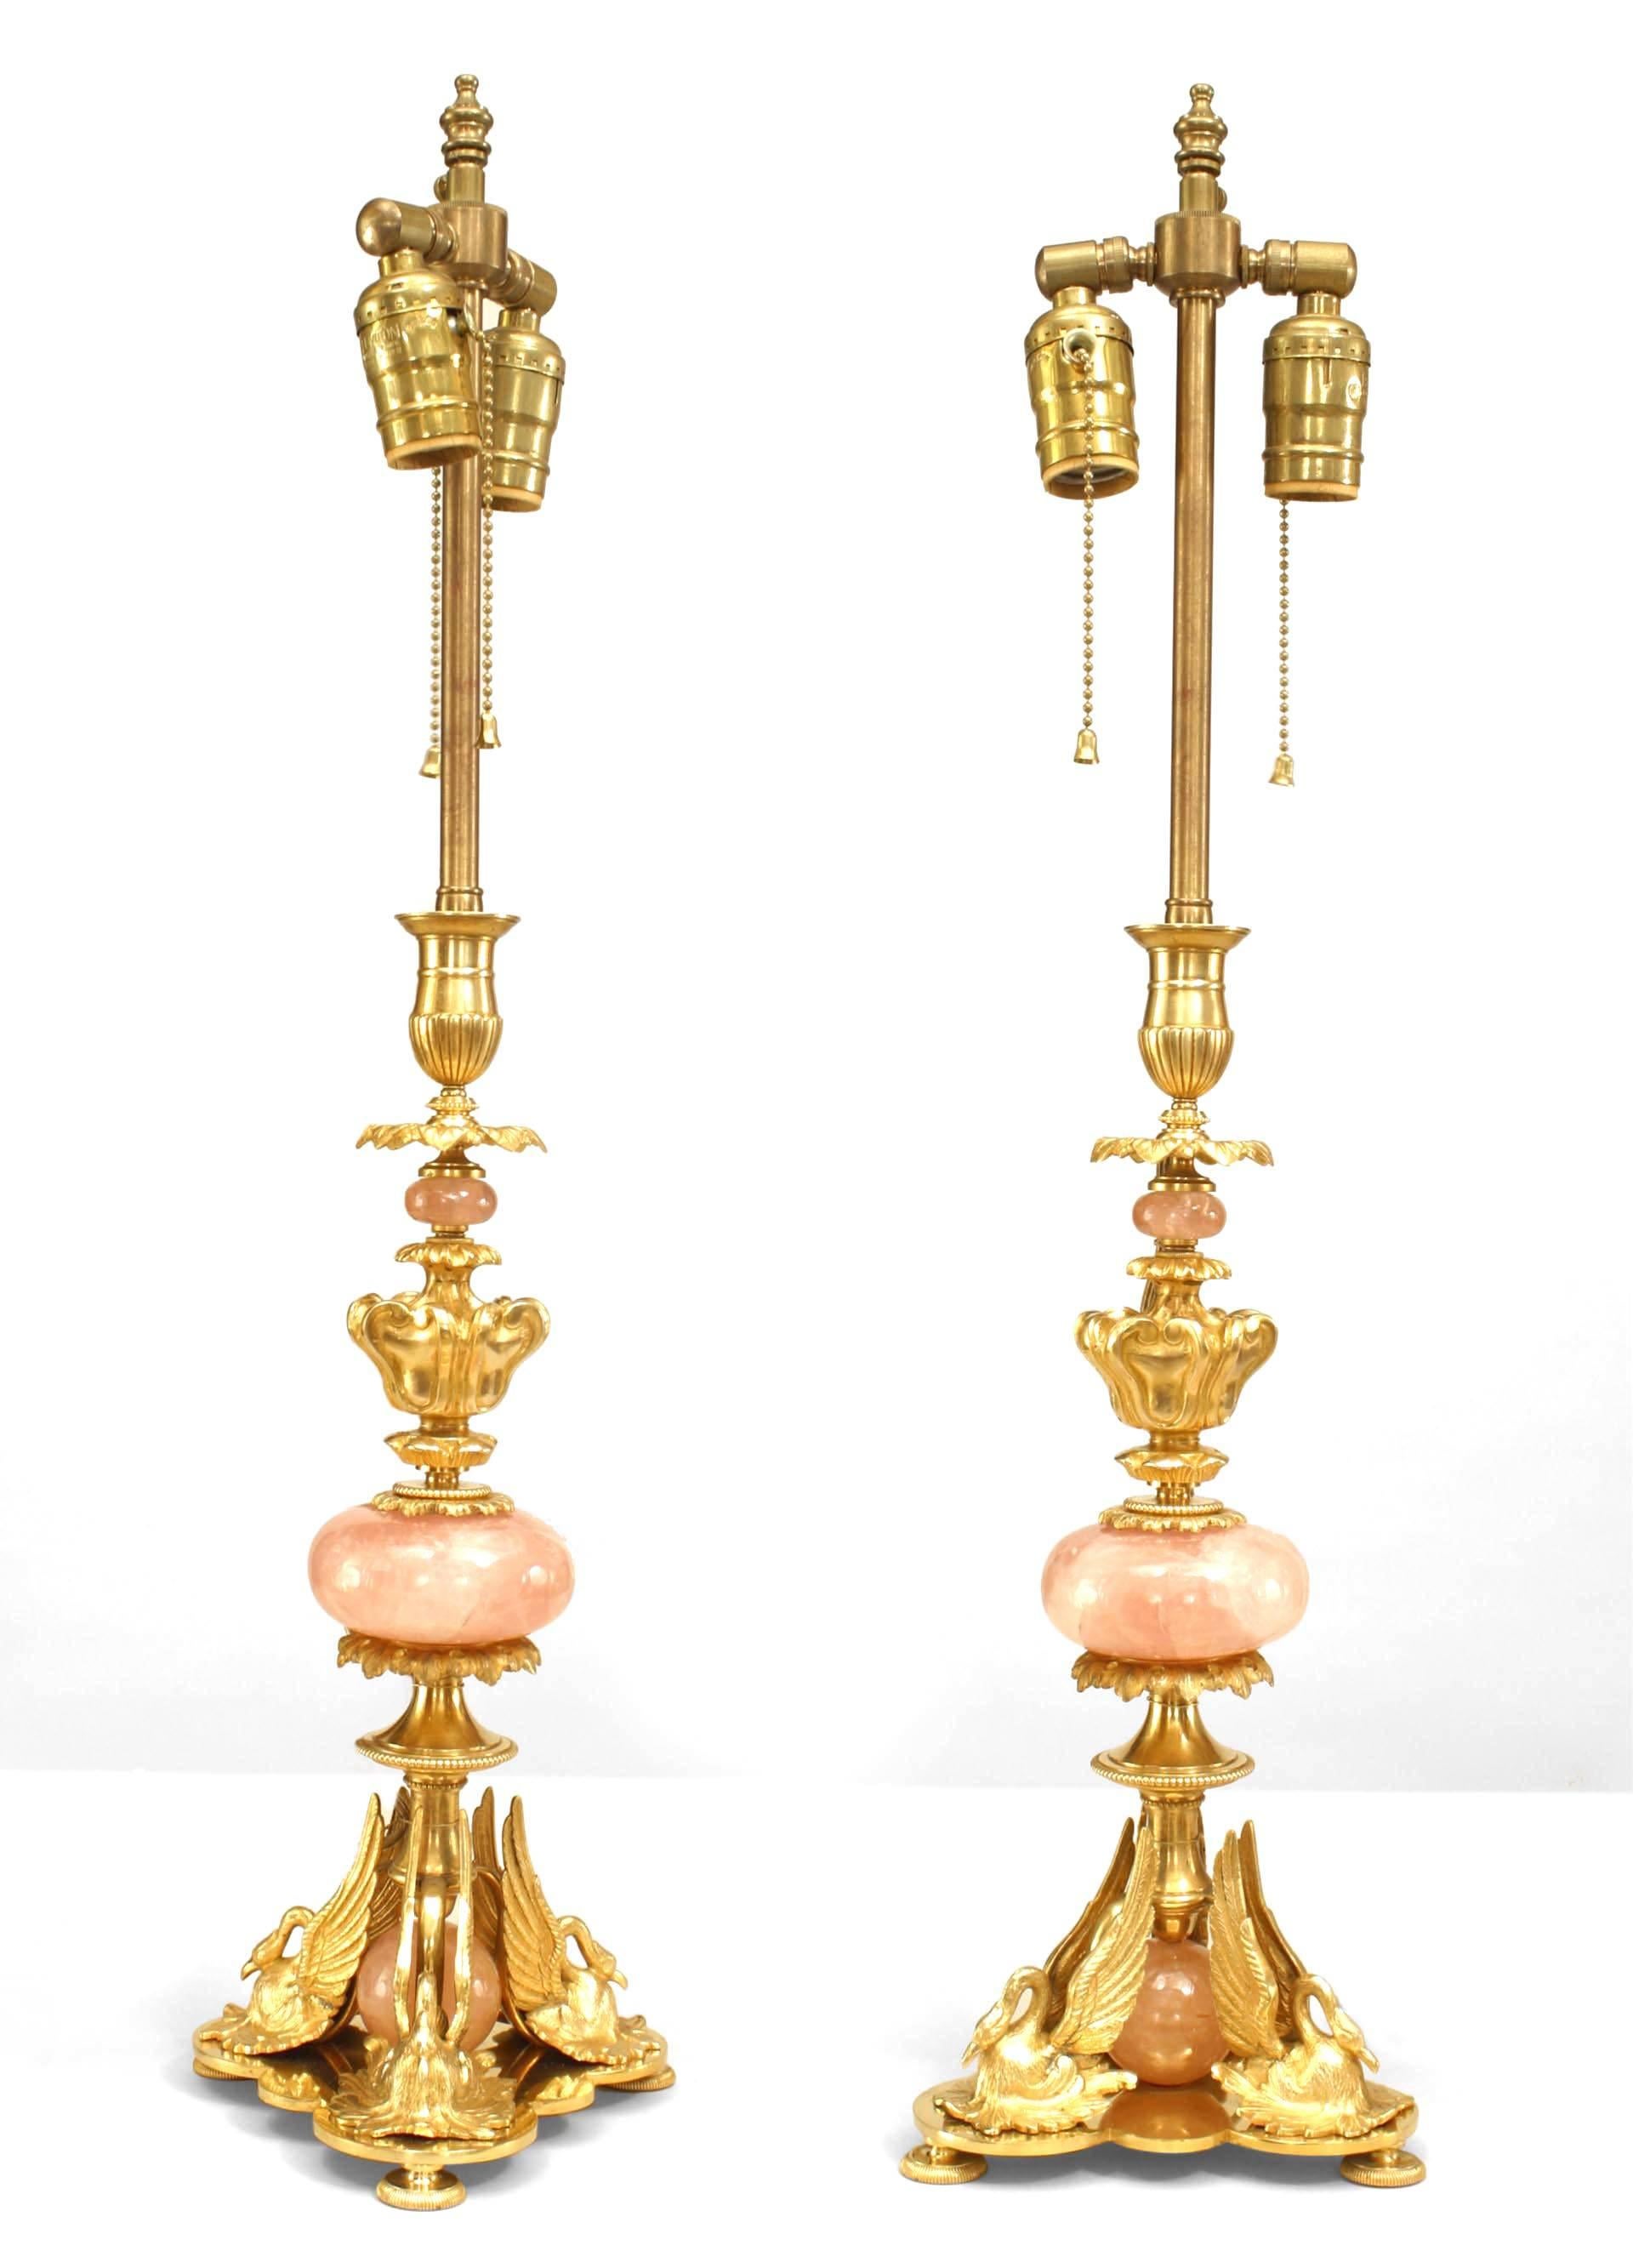 Pair of French Empire style (1940s) gilt bronze and rose quartz table lamps with 3 swans at base (PRICED AS Pair).
